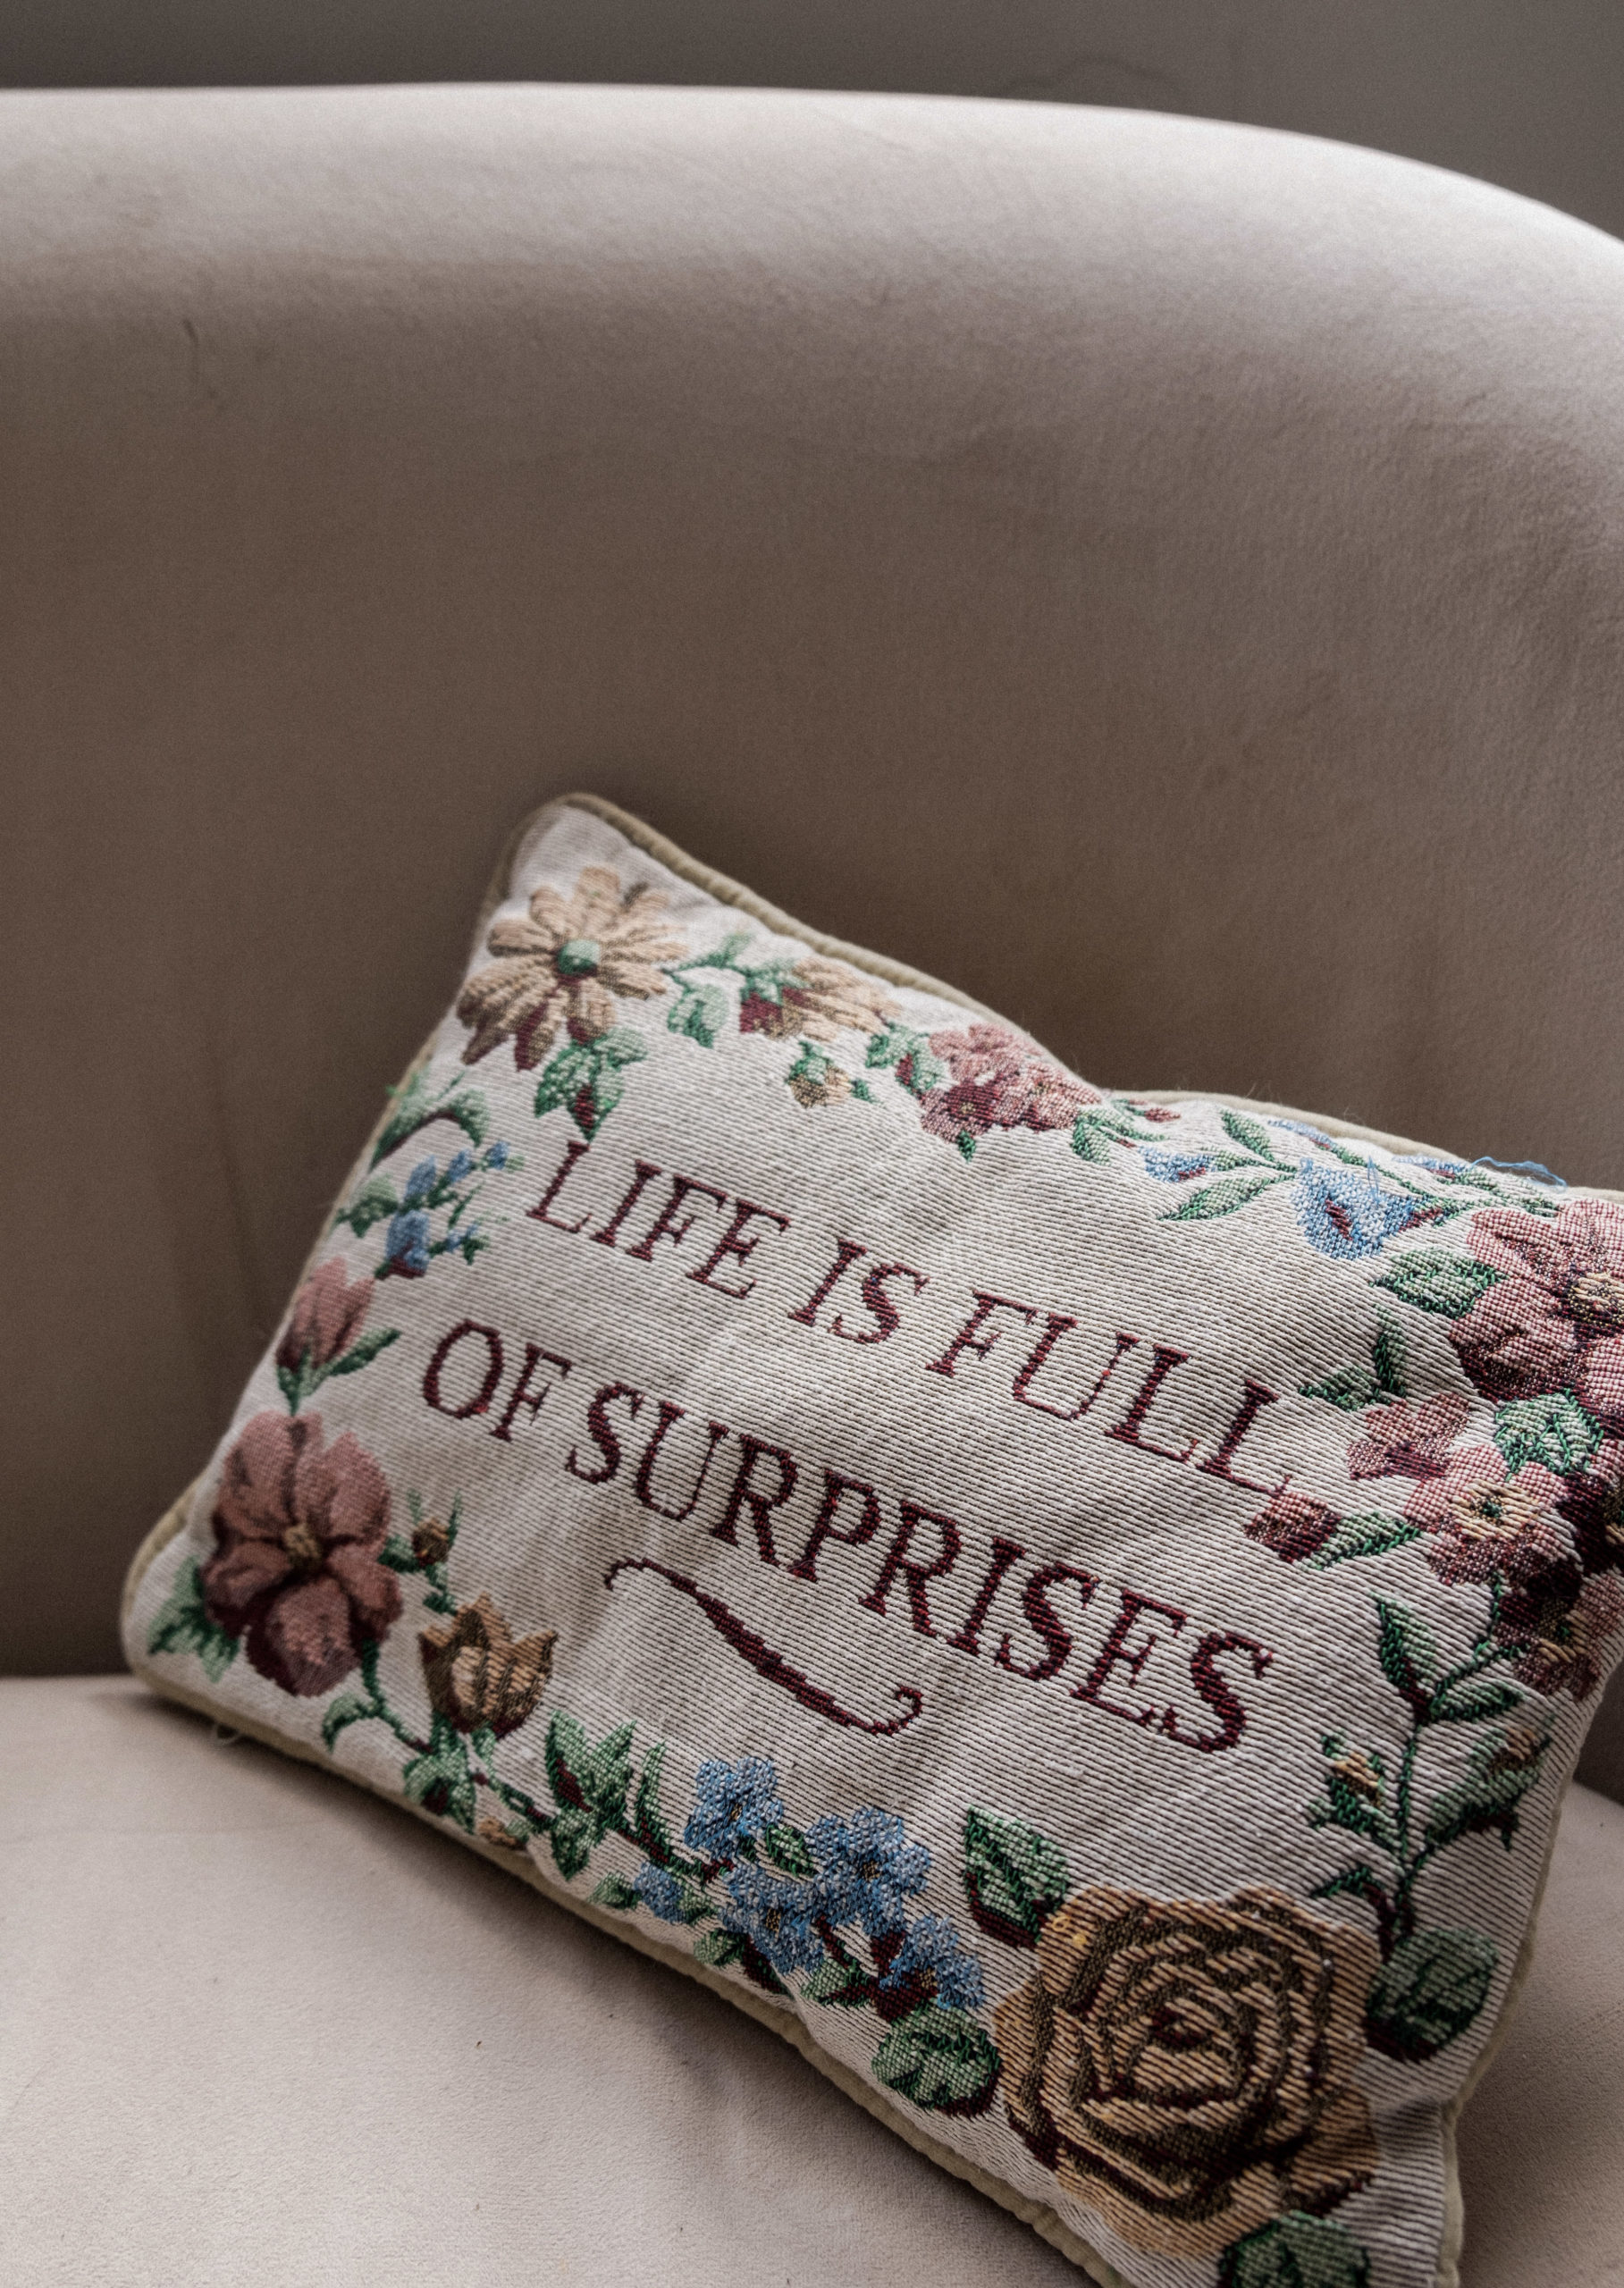 Pillow with an unexpected message on it "life is full of surprises"